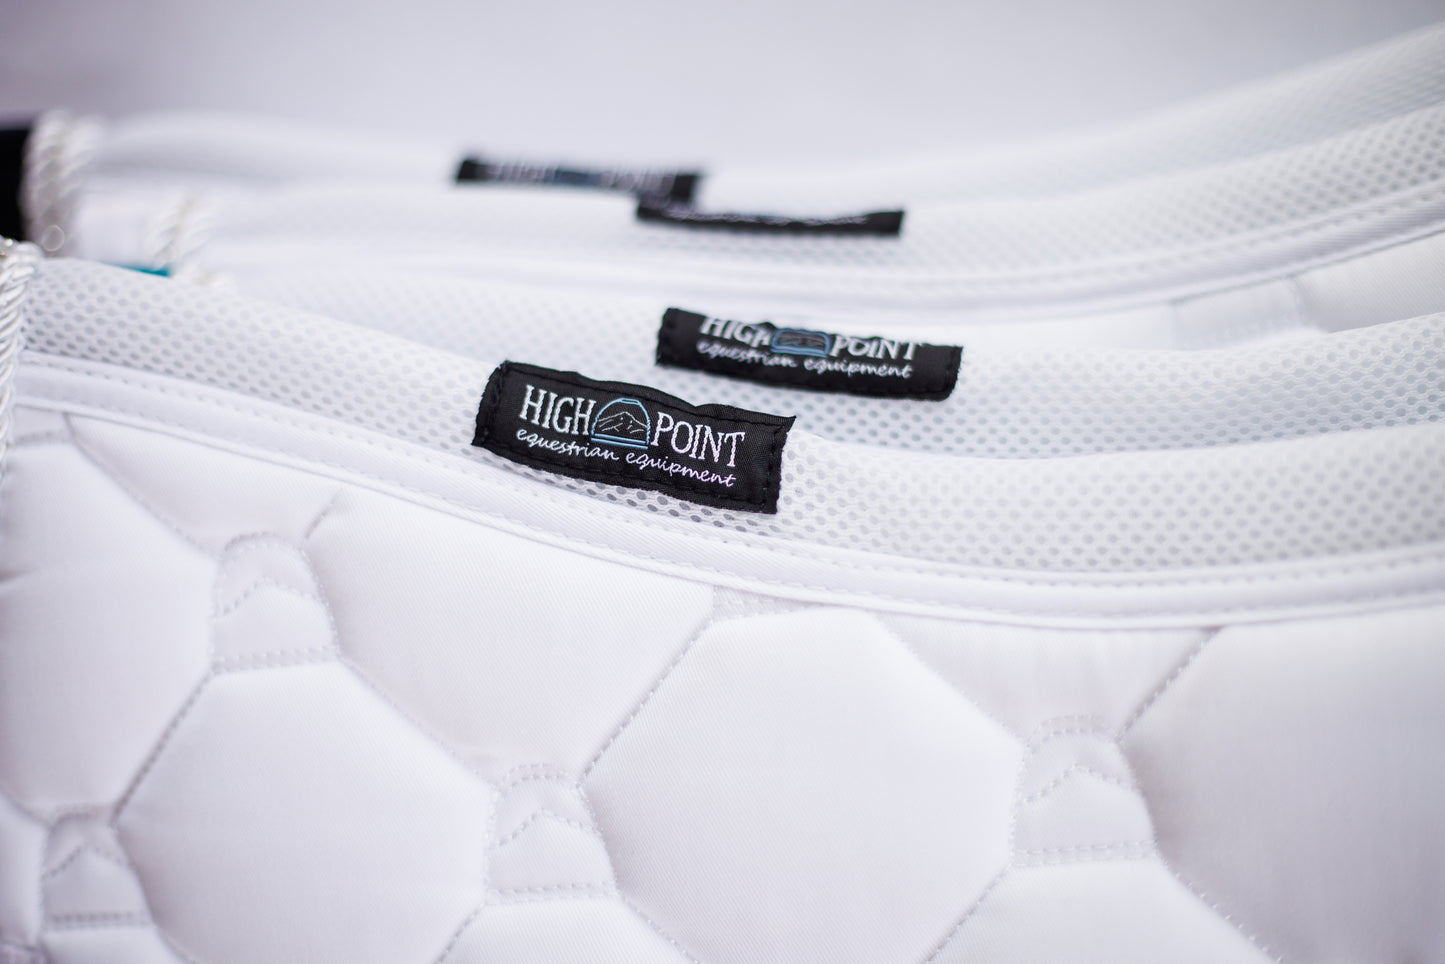 High Point saddle pads with breathable mesh spine to reduce sweating and heat